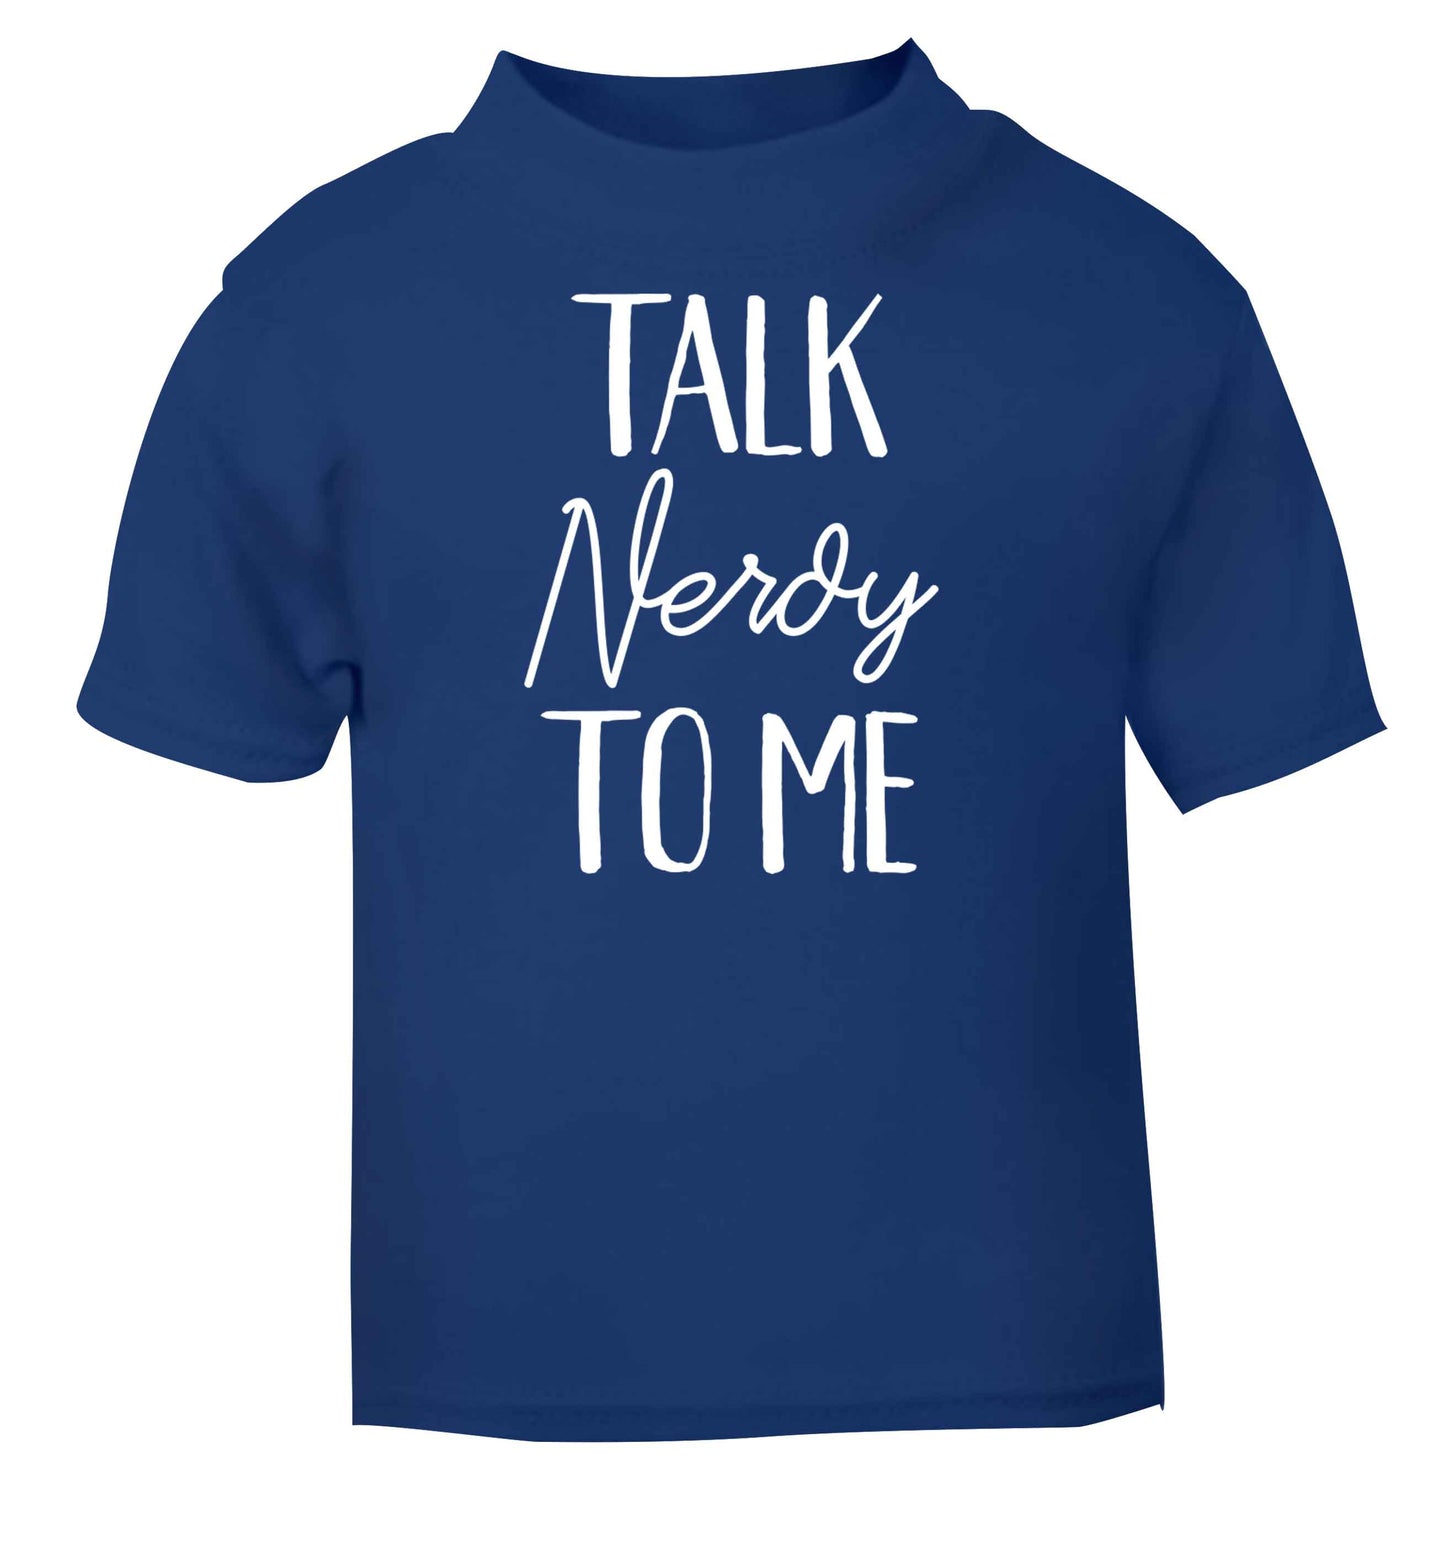 Talk nerdy to me blue baby toddler Tshirt 2 Years